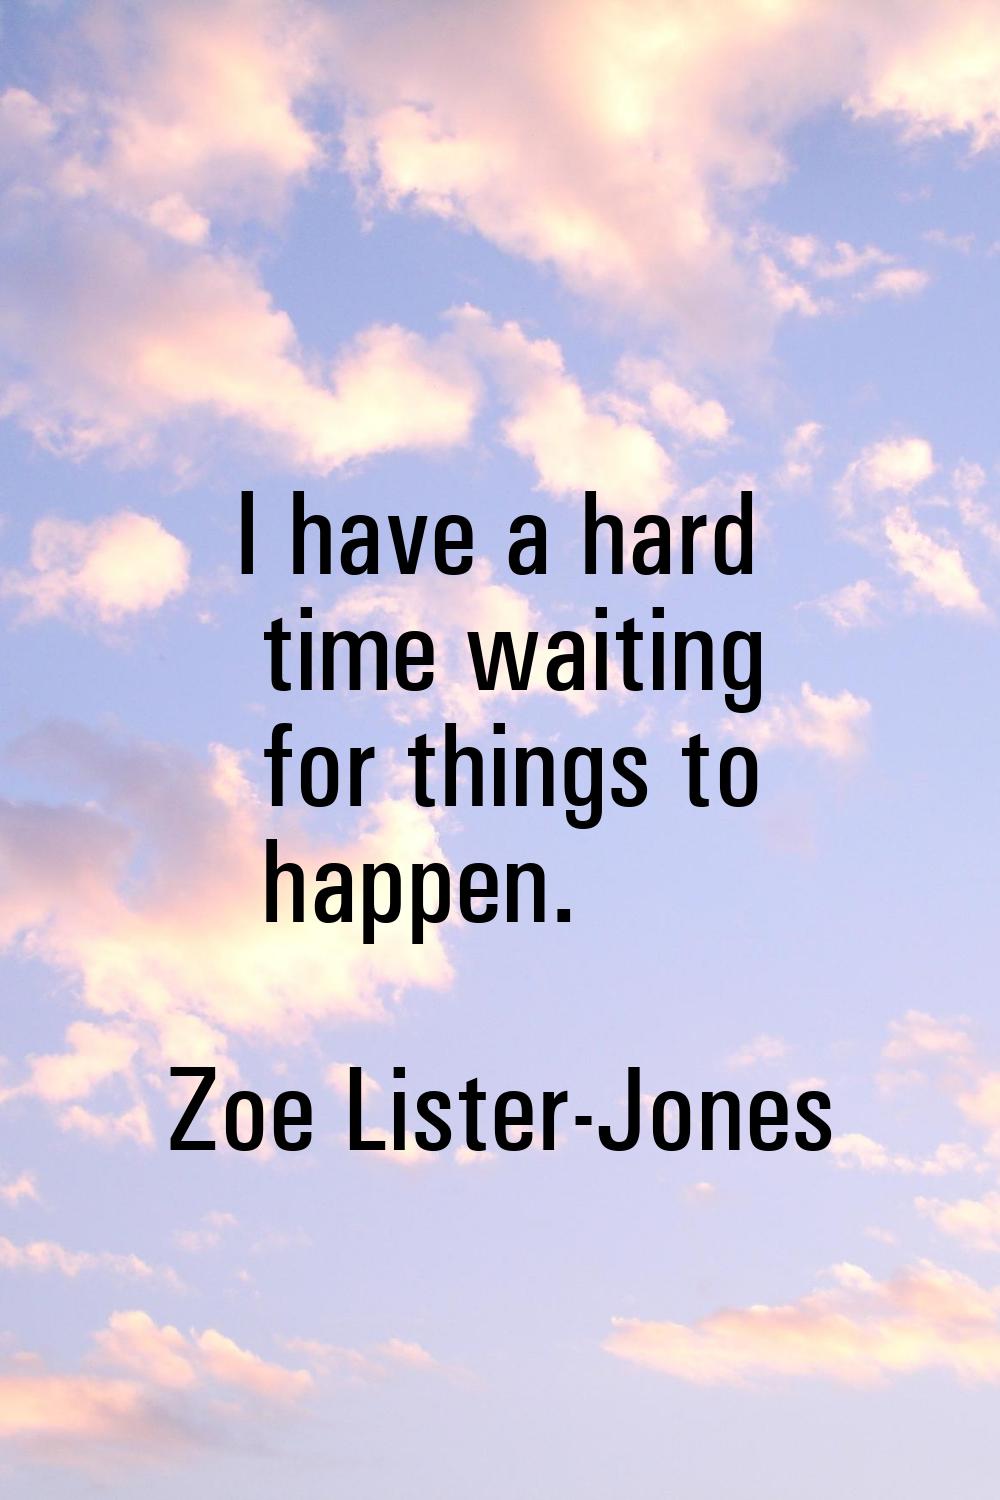 I have a hard time waiting for things to happen.